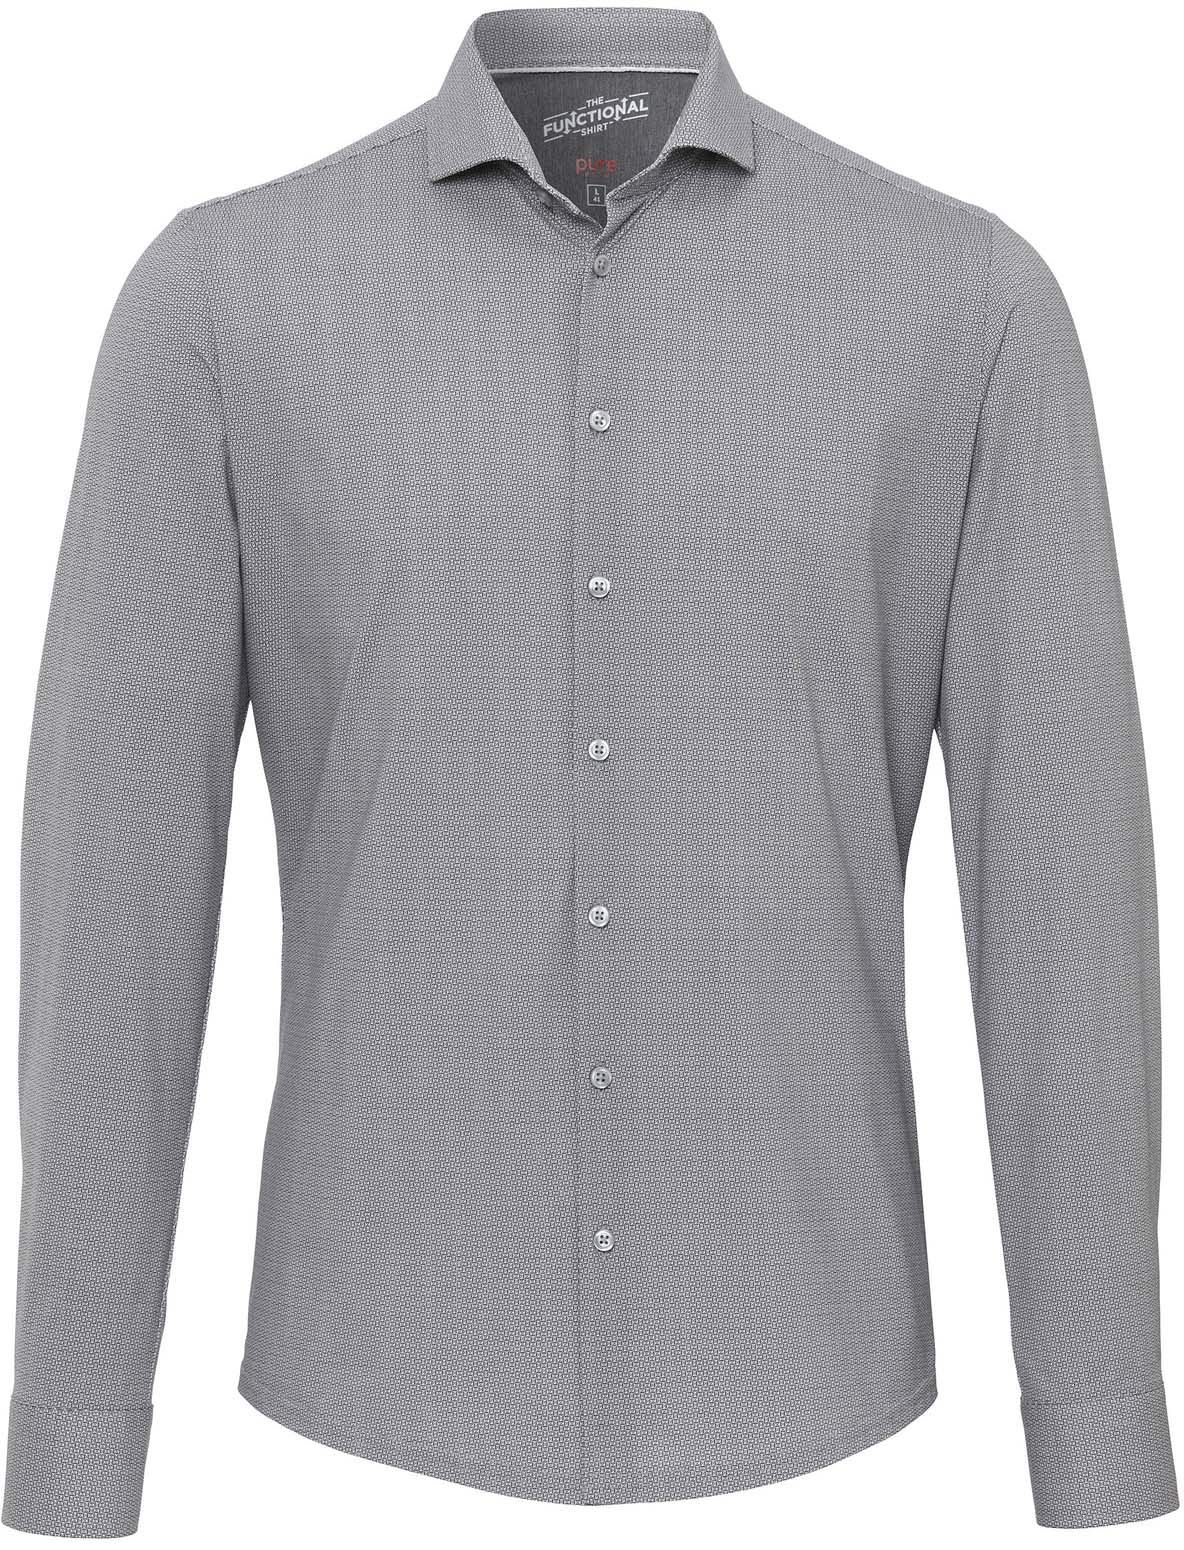 Pure H.Tico The Functional Shirt Dessin Grey size 15 3/4